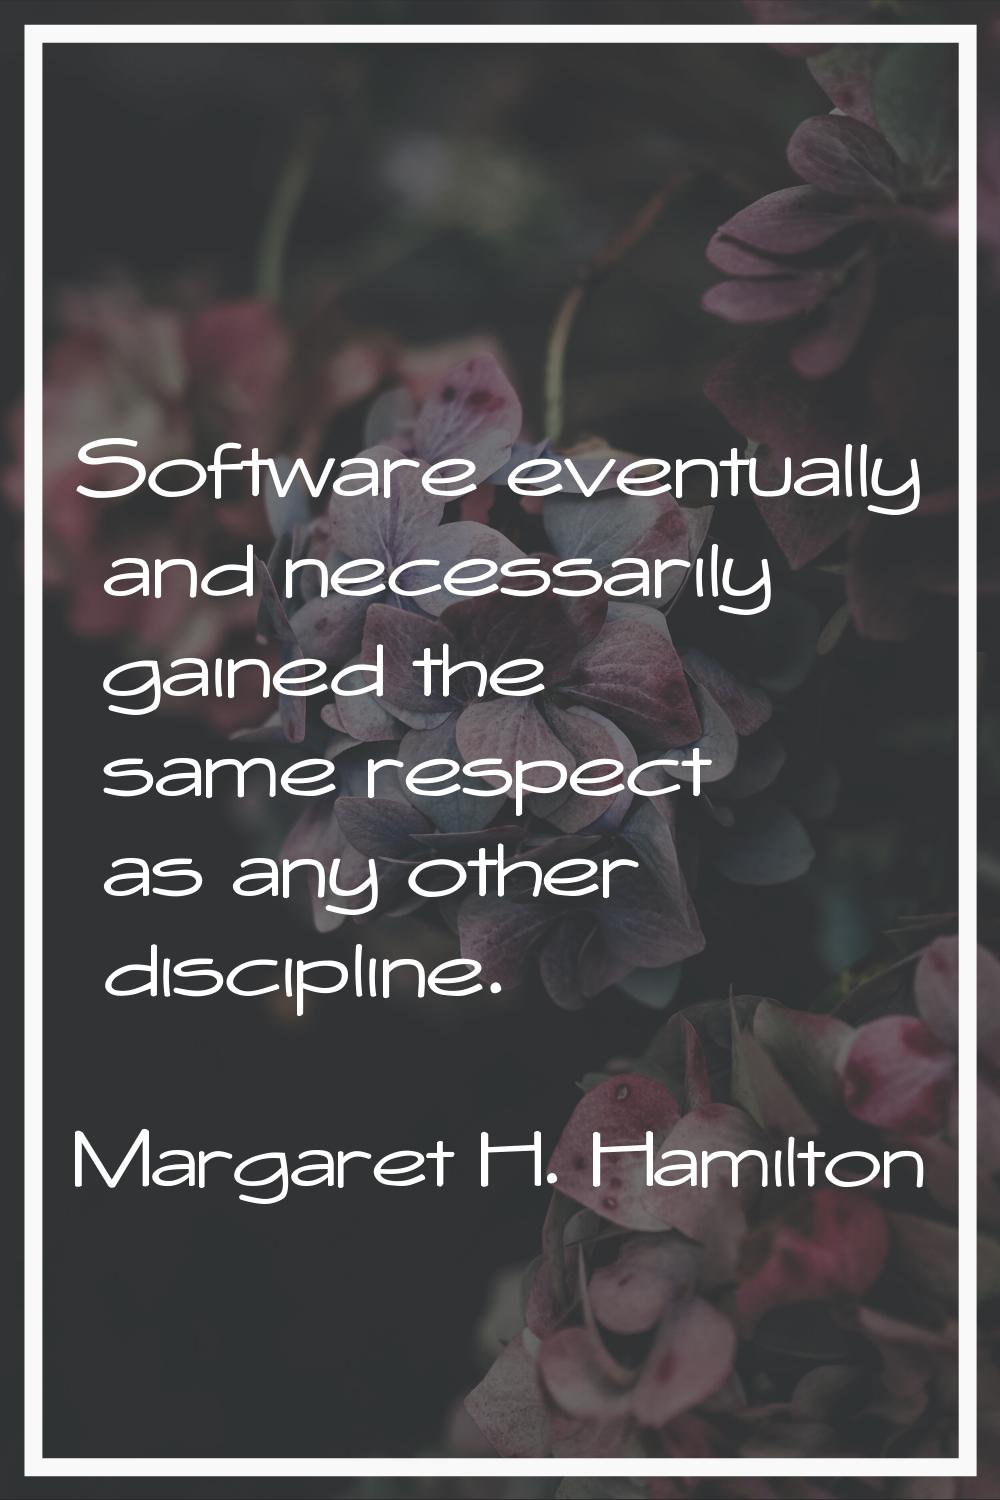 Software eventually and necessarily gained the same respect as any other discipline.